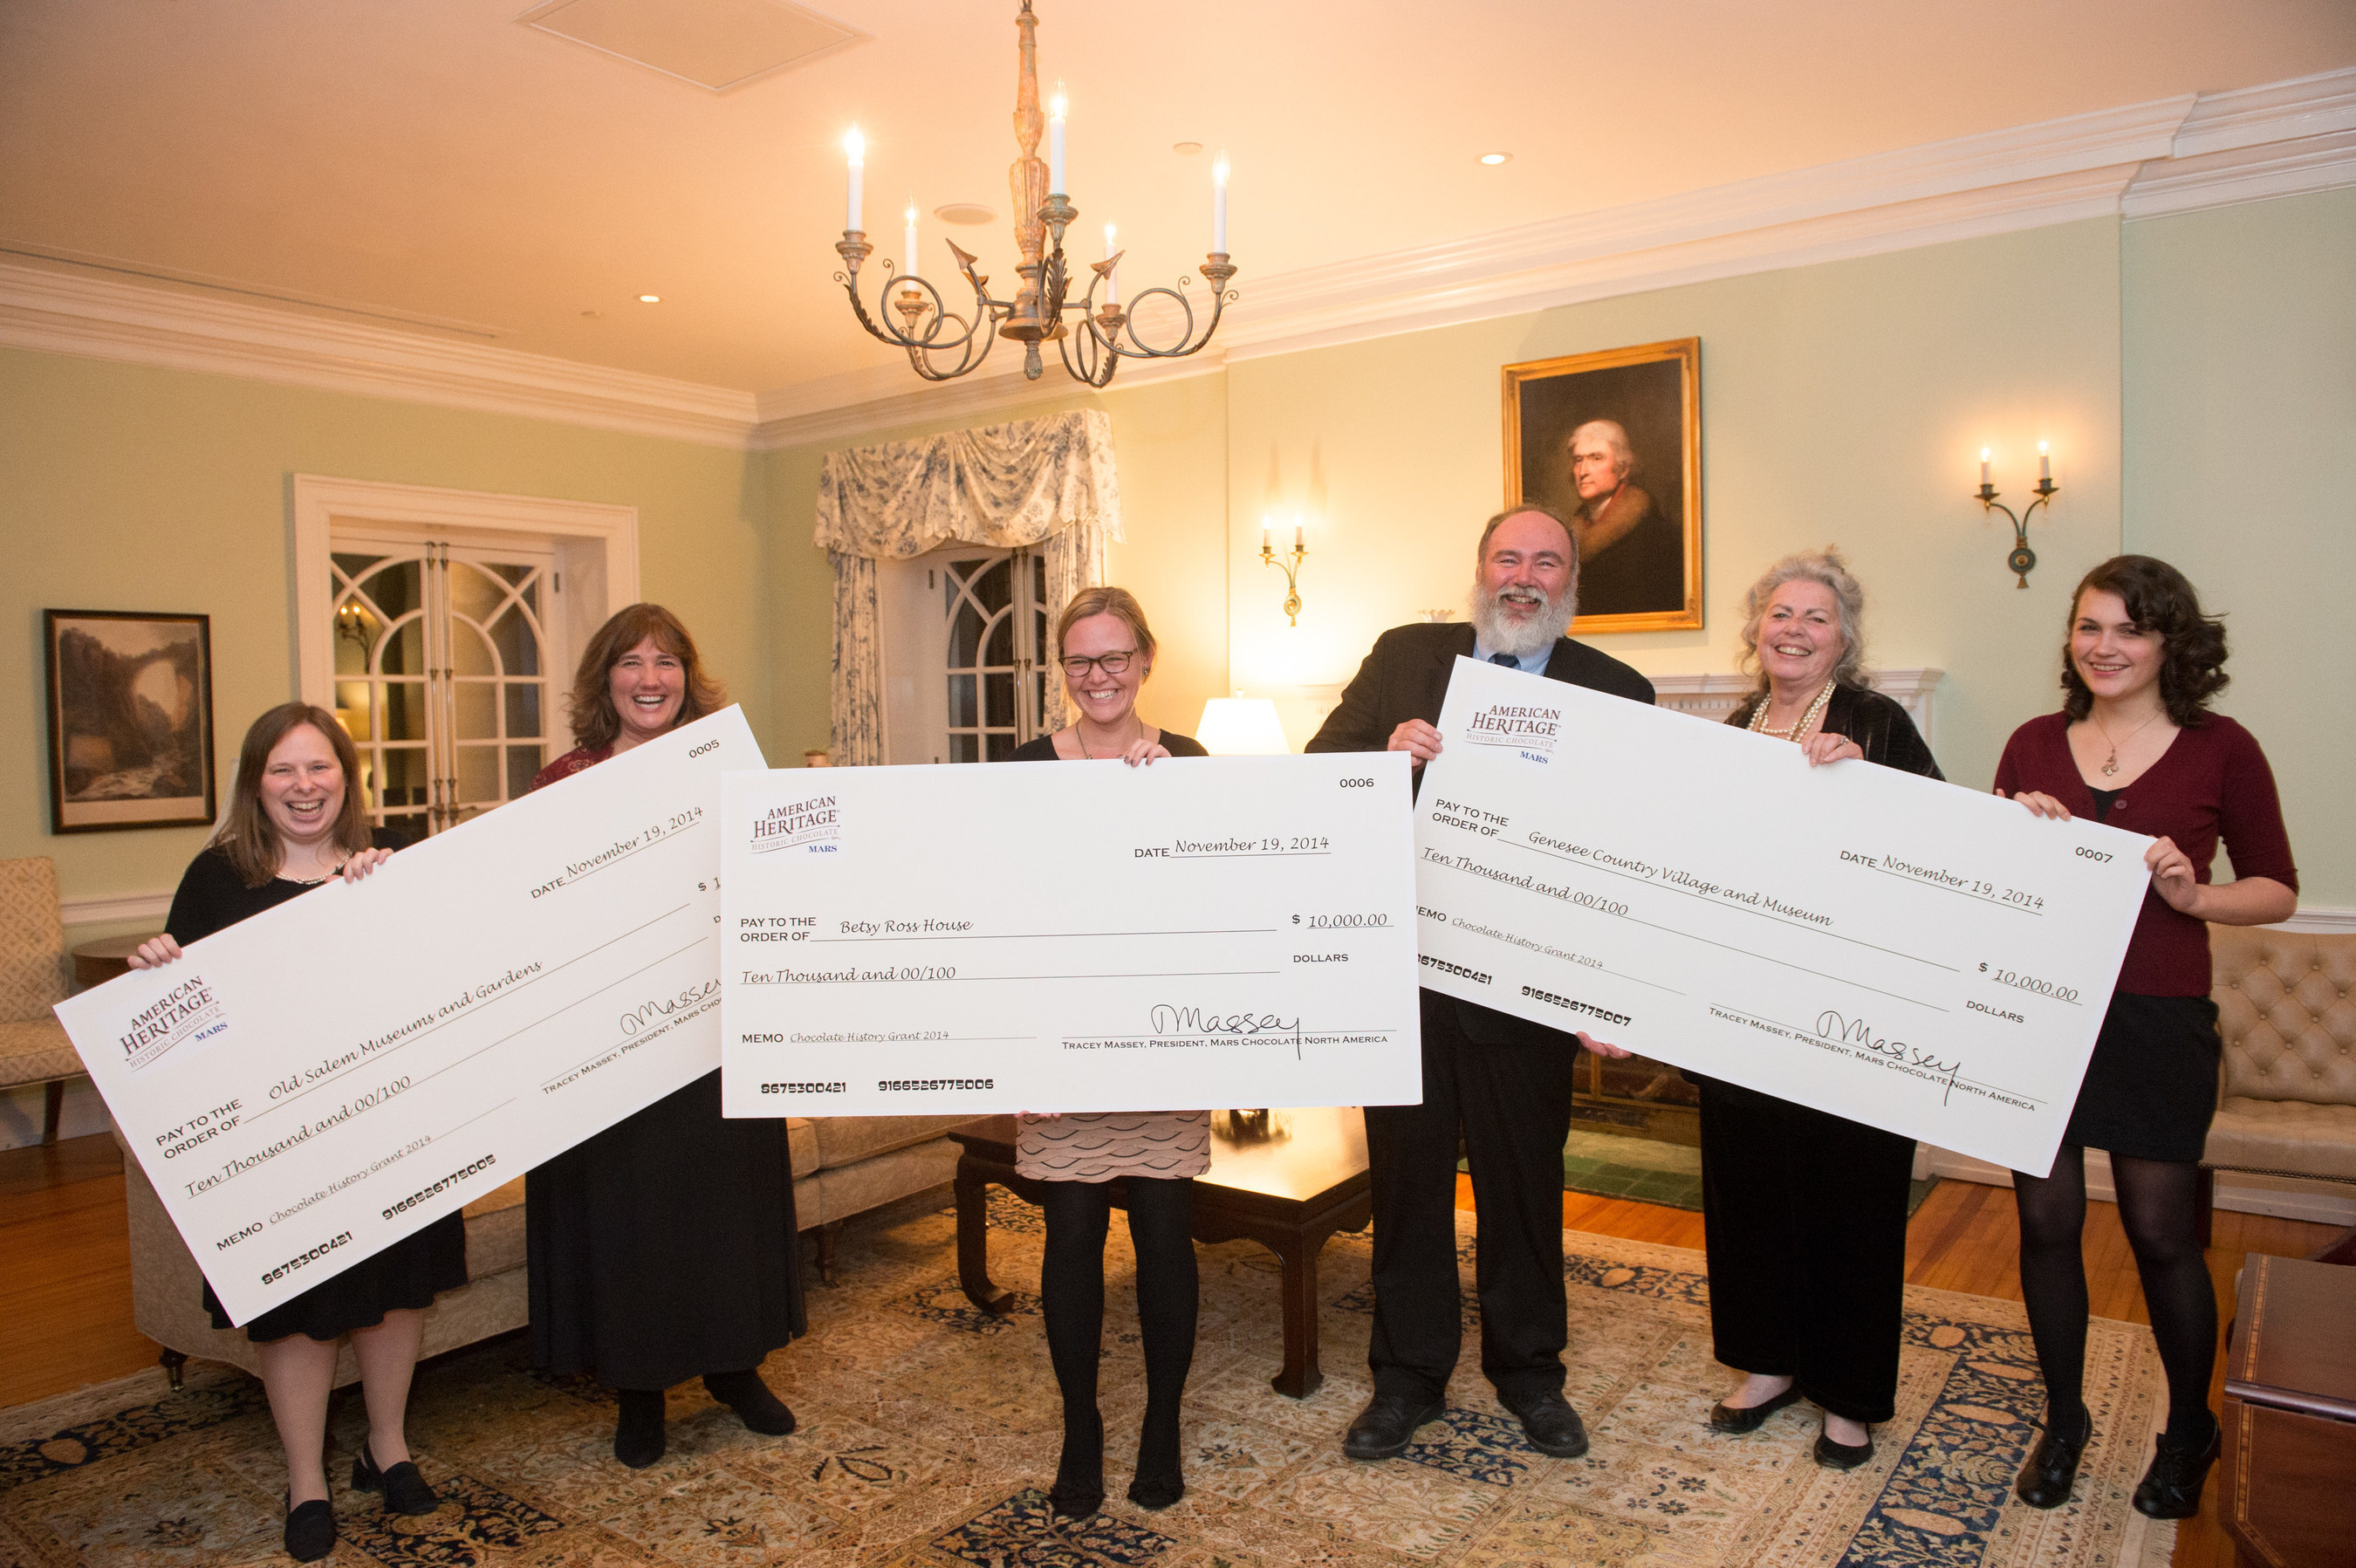 Mars, Incorporated 2014 Chocolate History Research and Investigative Studies Grant Winners: Joanna Roberts and Darlee Snyder of Old Salem Museum & Gardens; Lisa Acker Moulder of The Betsy Ross House; Brian Nagel, Pat Mead and Sarah Ledtke of Genesse Country Village & Museum